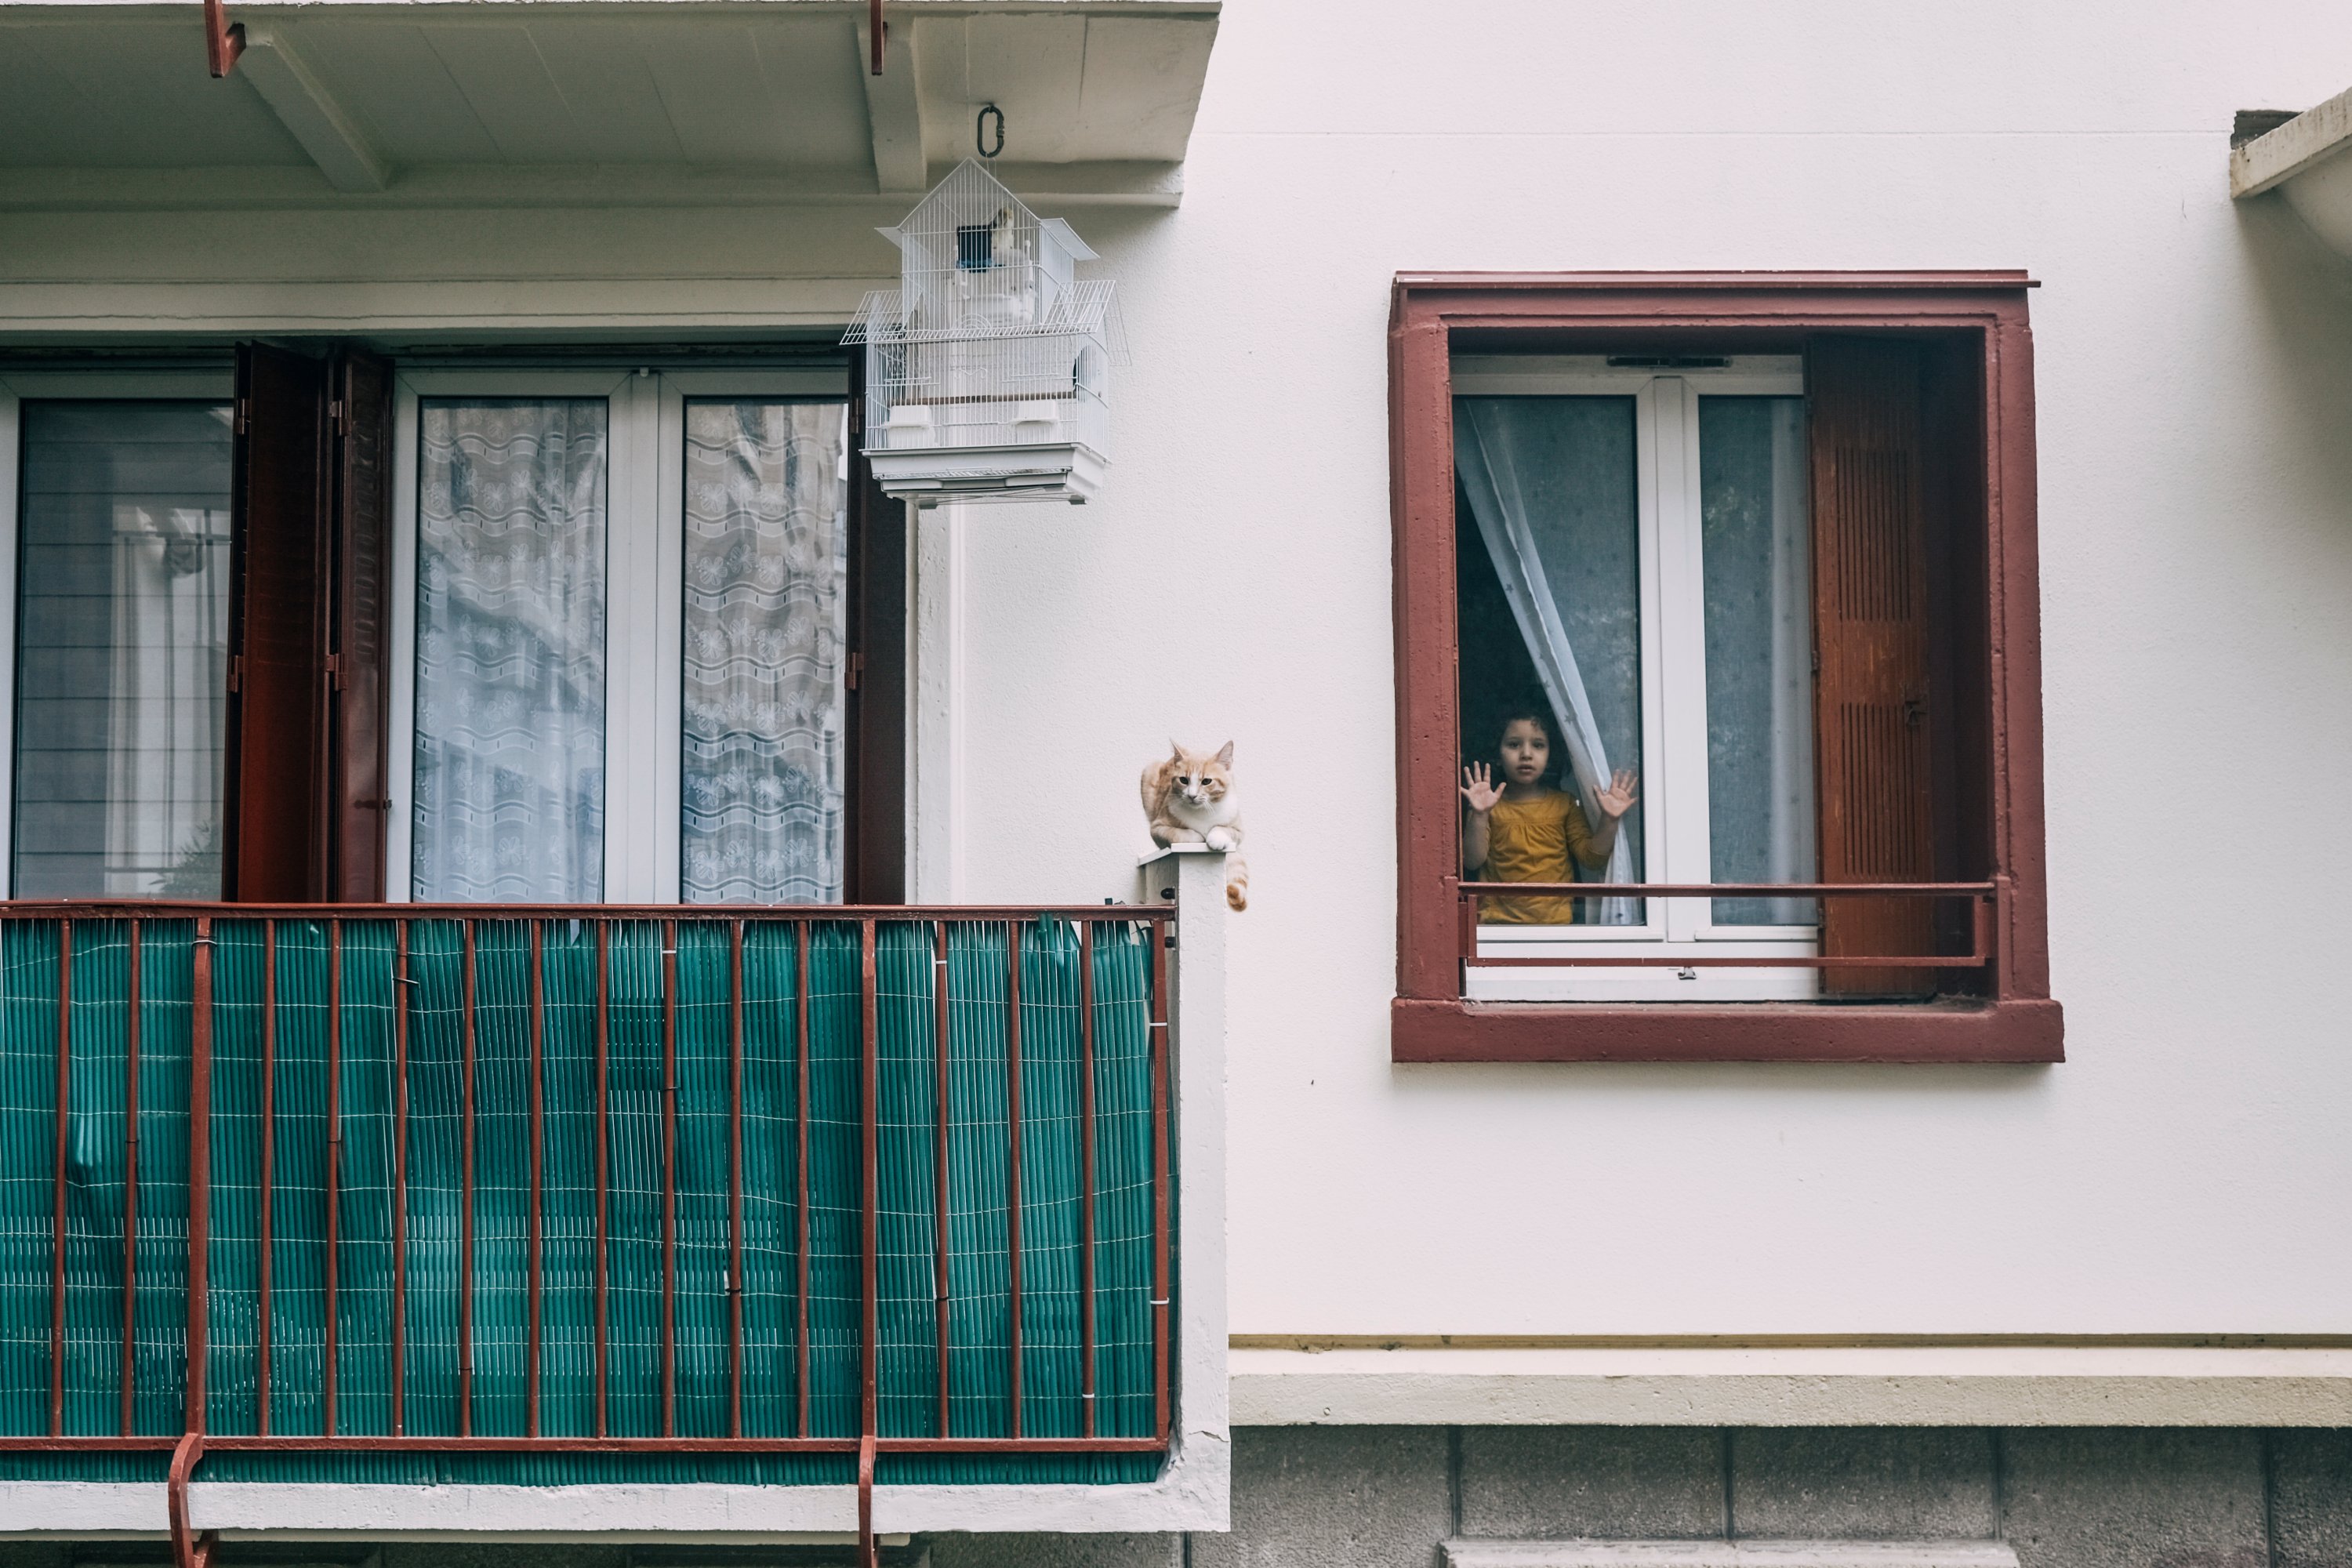 A cat sits on a balcony ledge, just under a cage with birds, as a little girl looks out the window in France, May 10, 2020. (Reuters Photo)